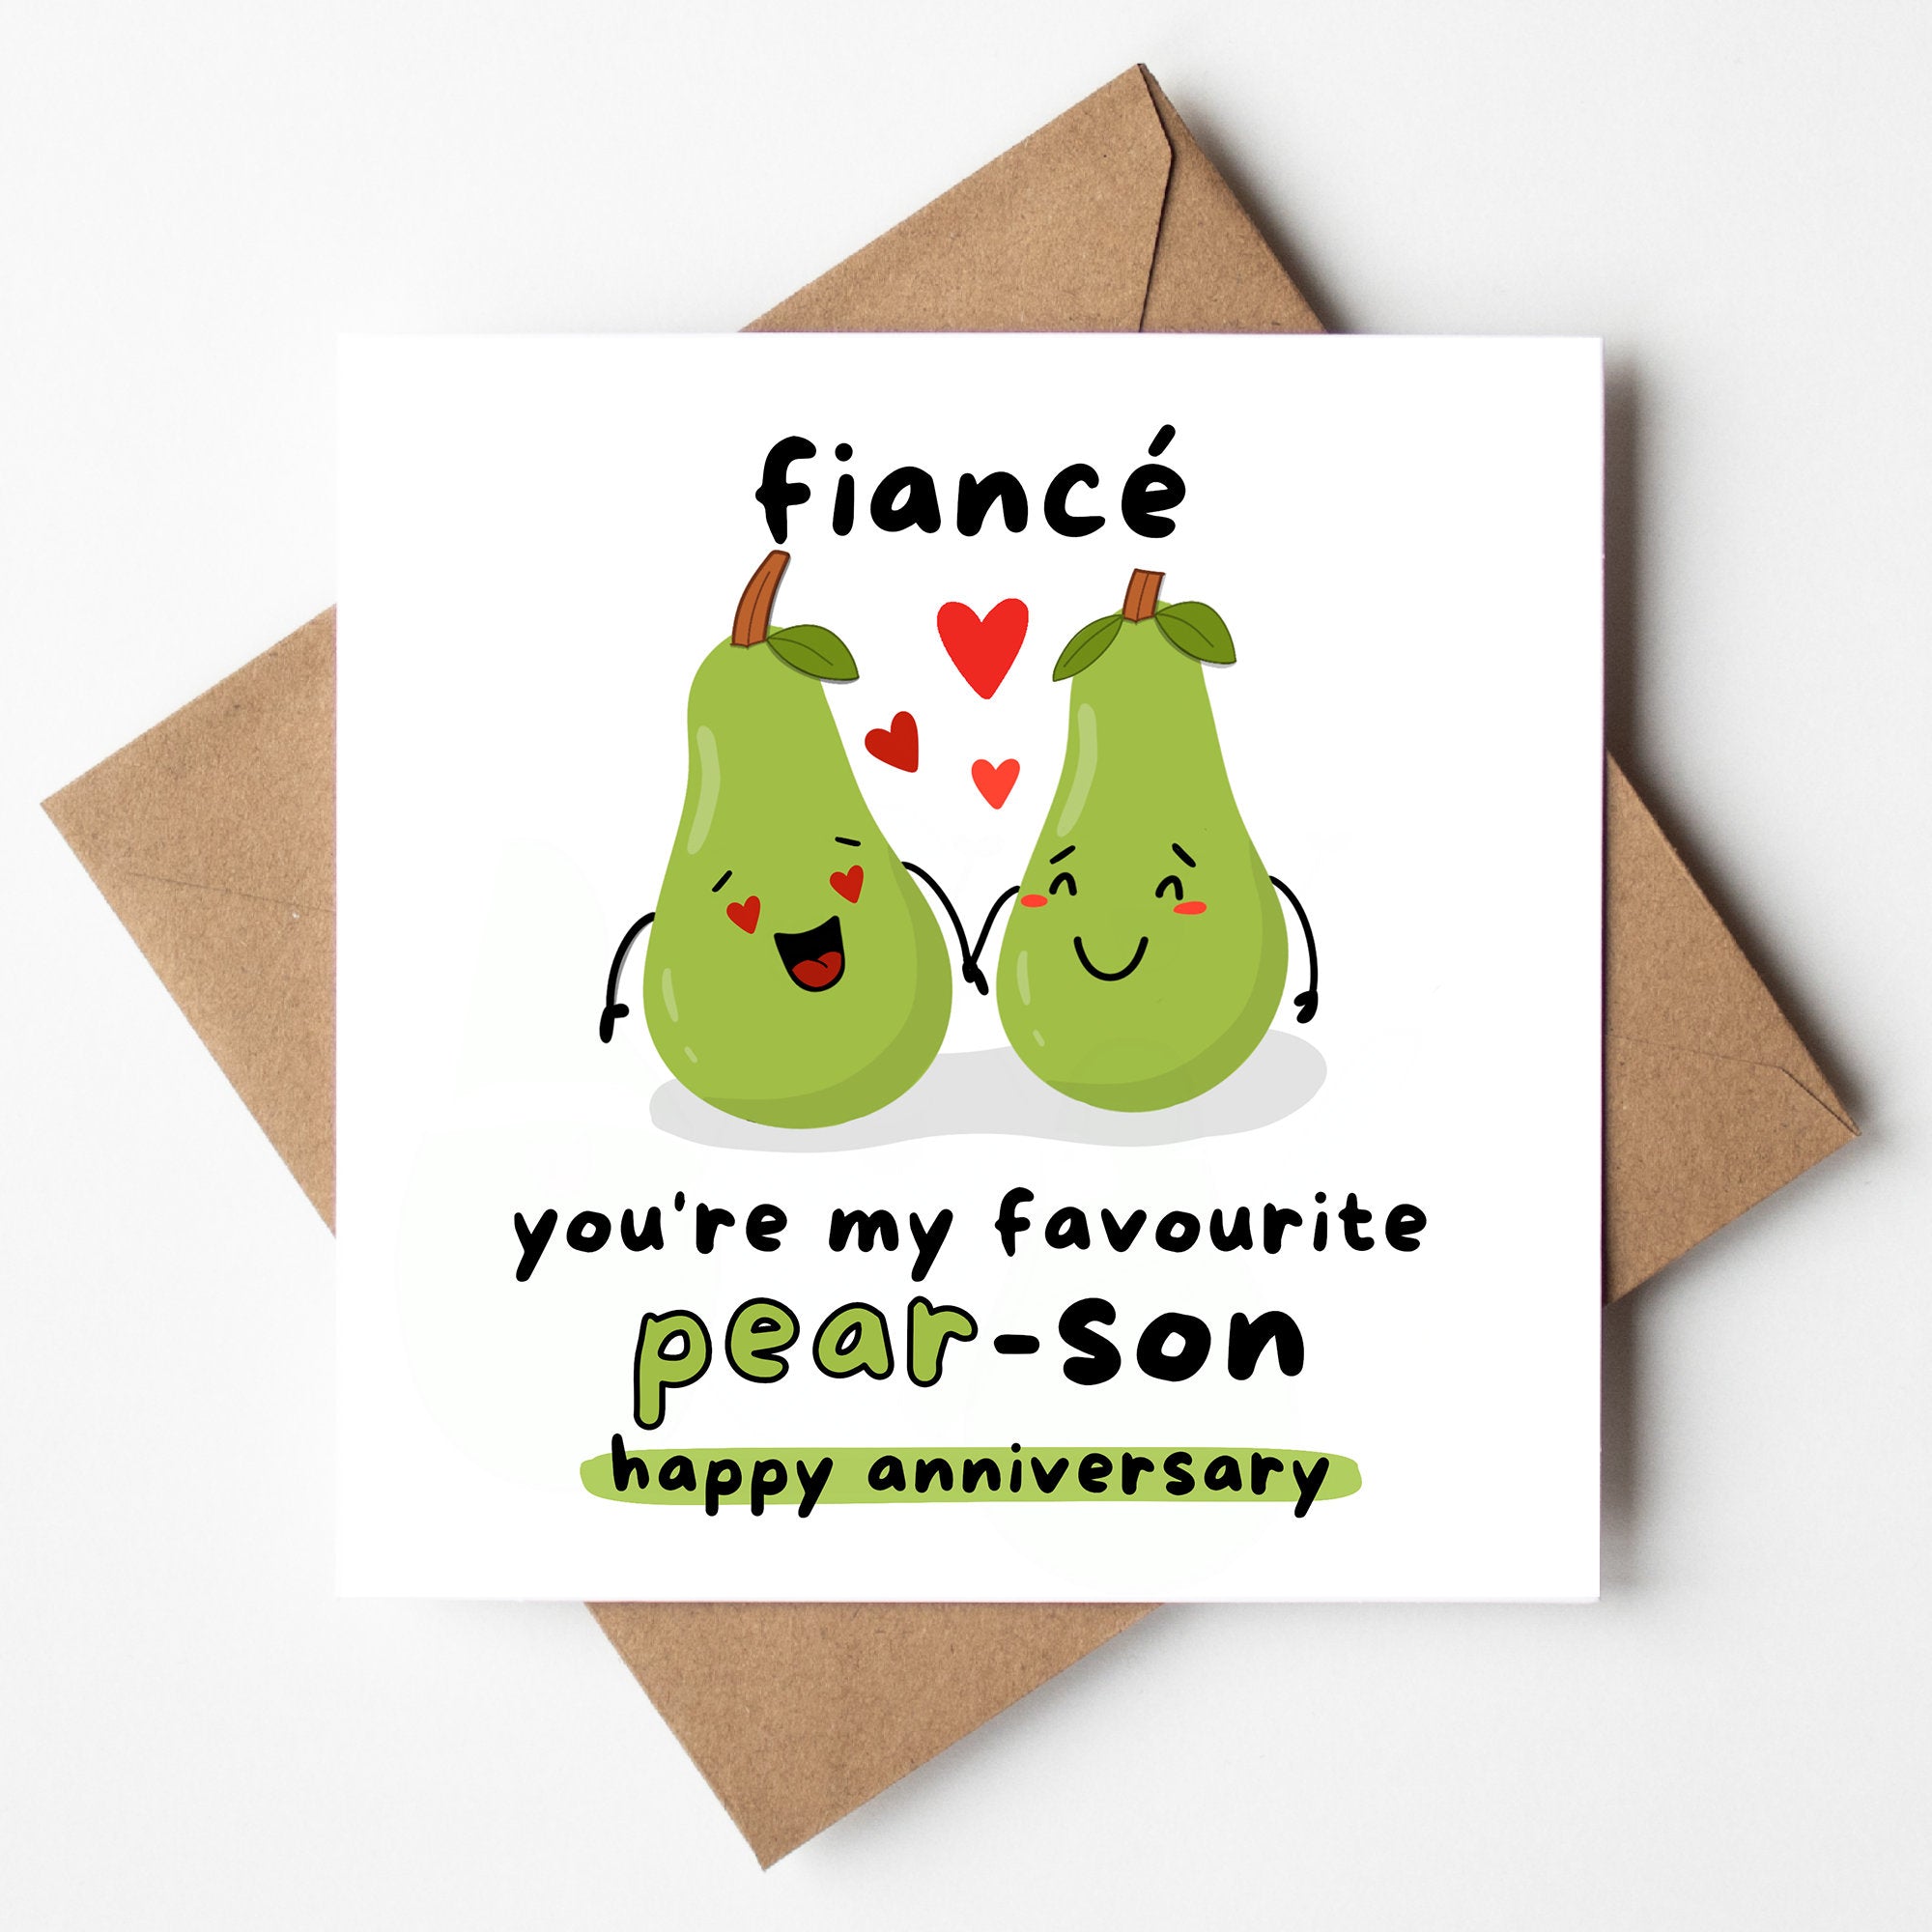 Fiance You're My Favourite Pear-son, Best Husband Ever, From Wife, Anniversary Card, For Him, Husband To be, Boyfriend, Cute, Greeting Card